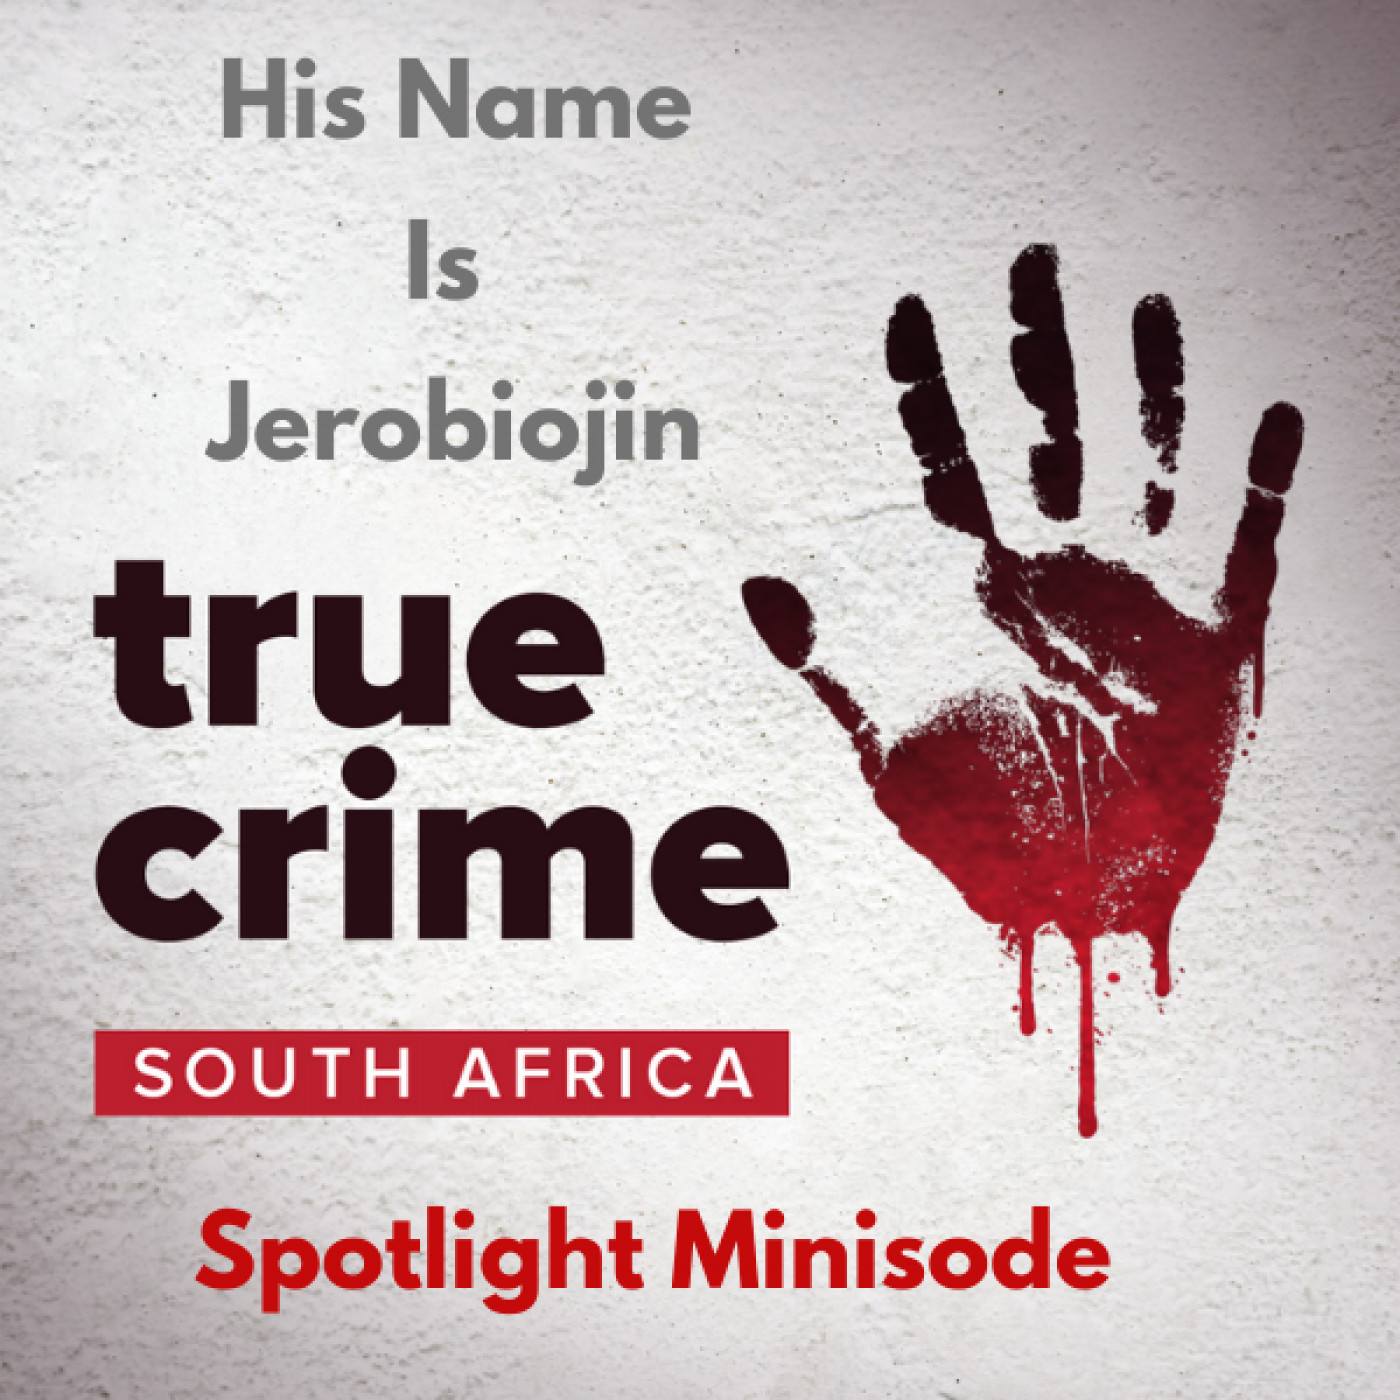 Spotlight Minisode His Name Is Jerobiojin: The Ethics of True Crime